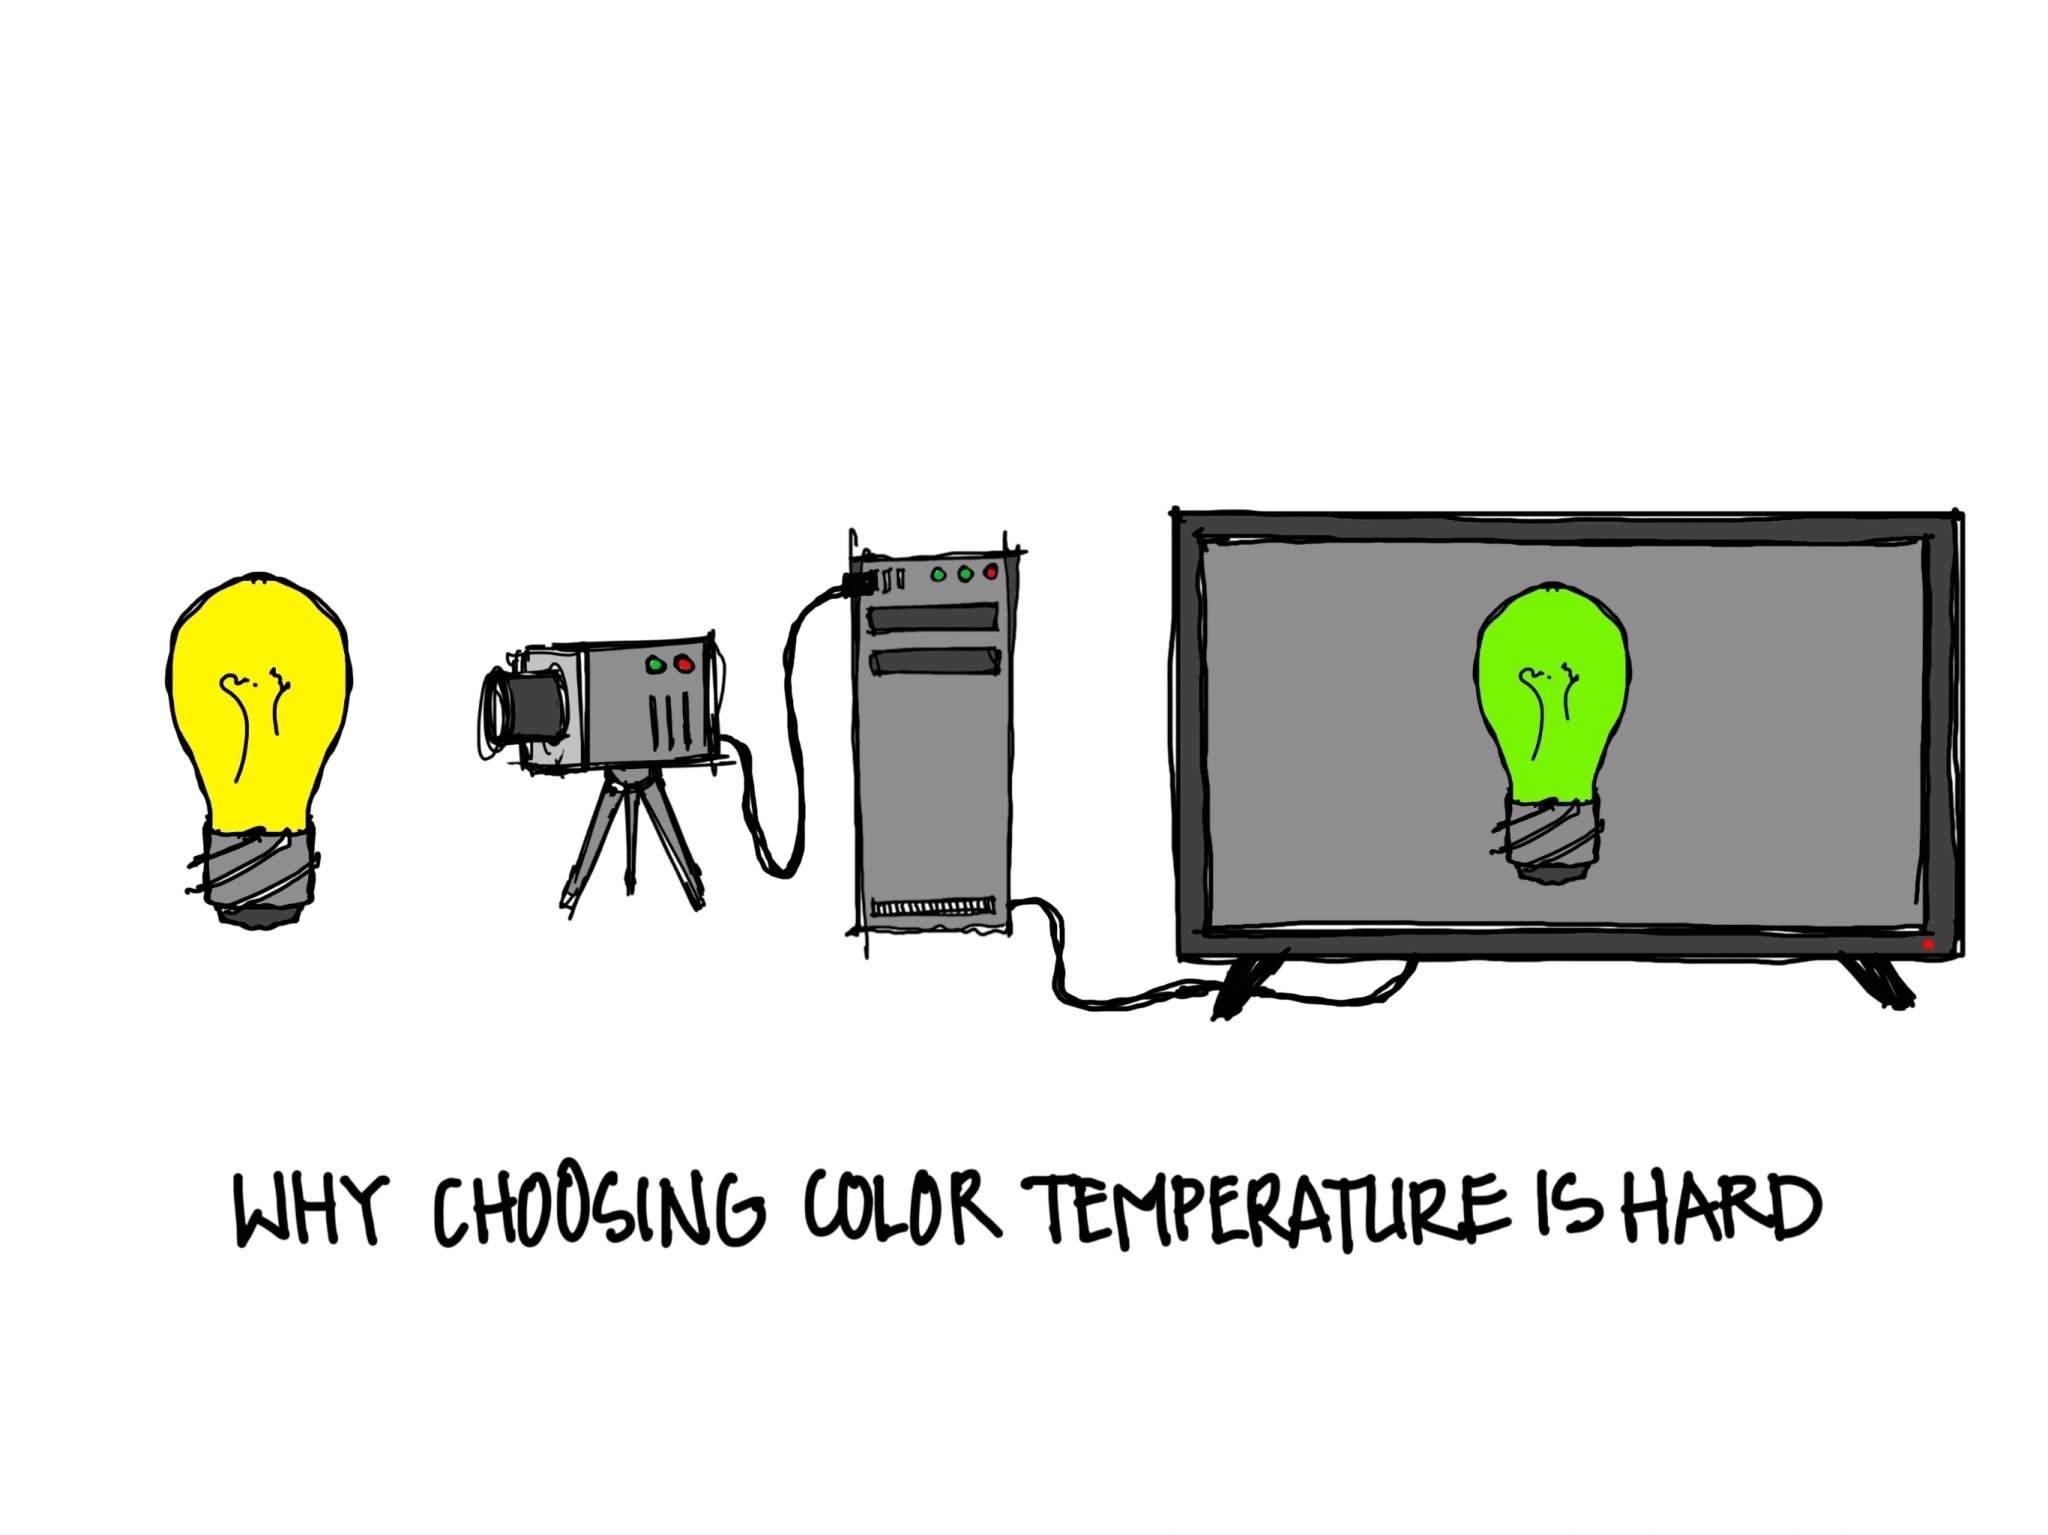 An illustration of a camera recording a lightbulb on a monitor. The lightbulb is yellow, but is depicted as green on the monitor. Text below reads "Why Choosing Color Temperature is Hard"